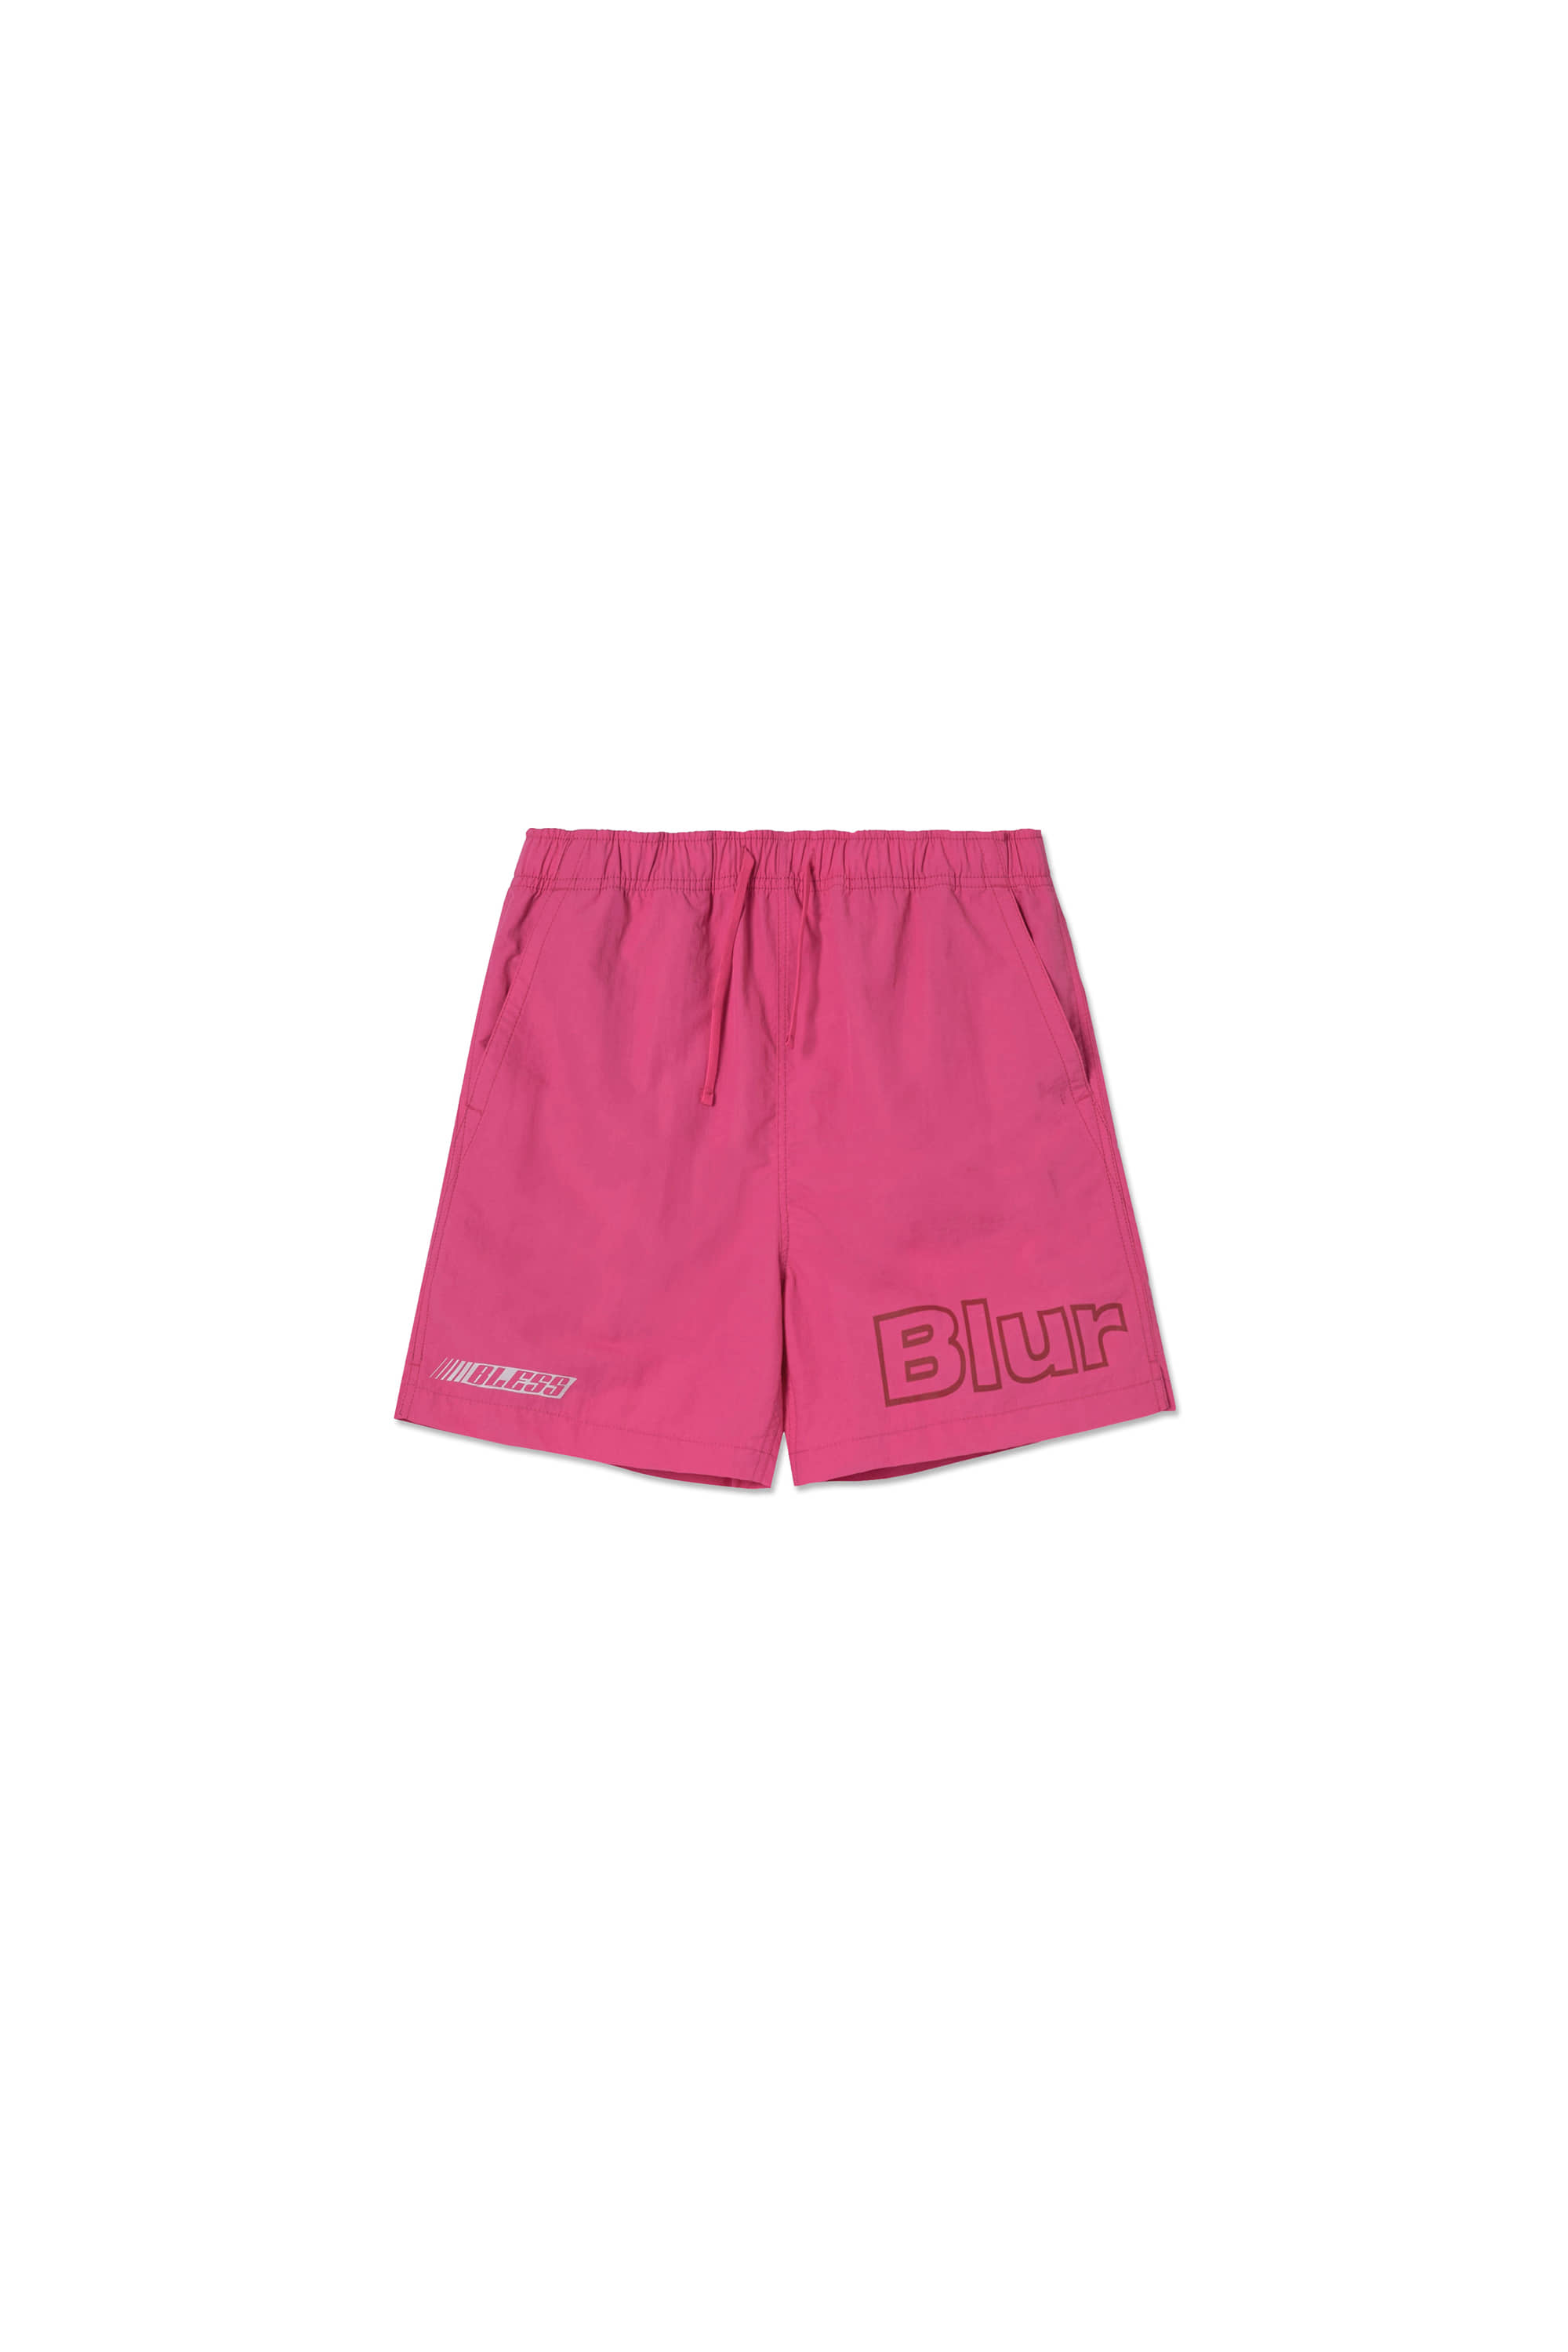 GRAPHIC WOVEN SHORTS - PINK